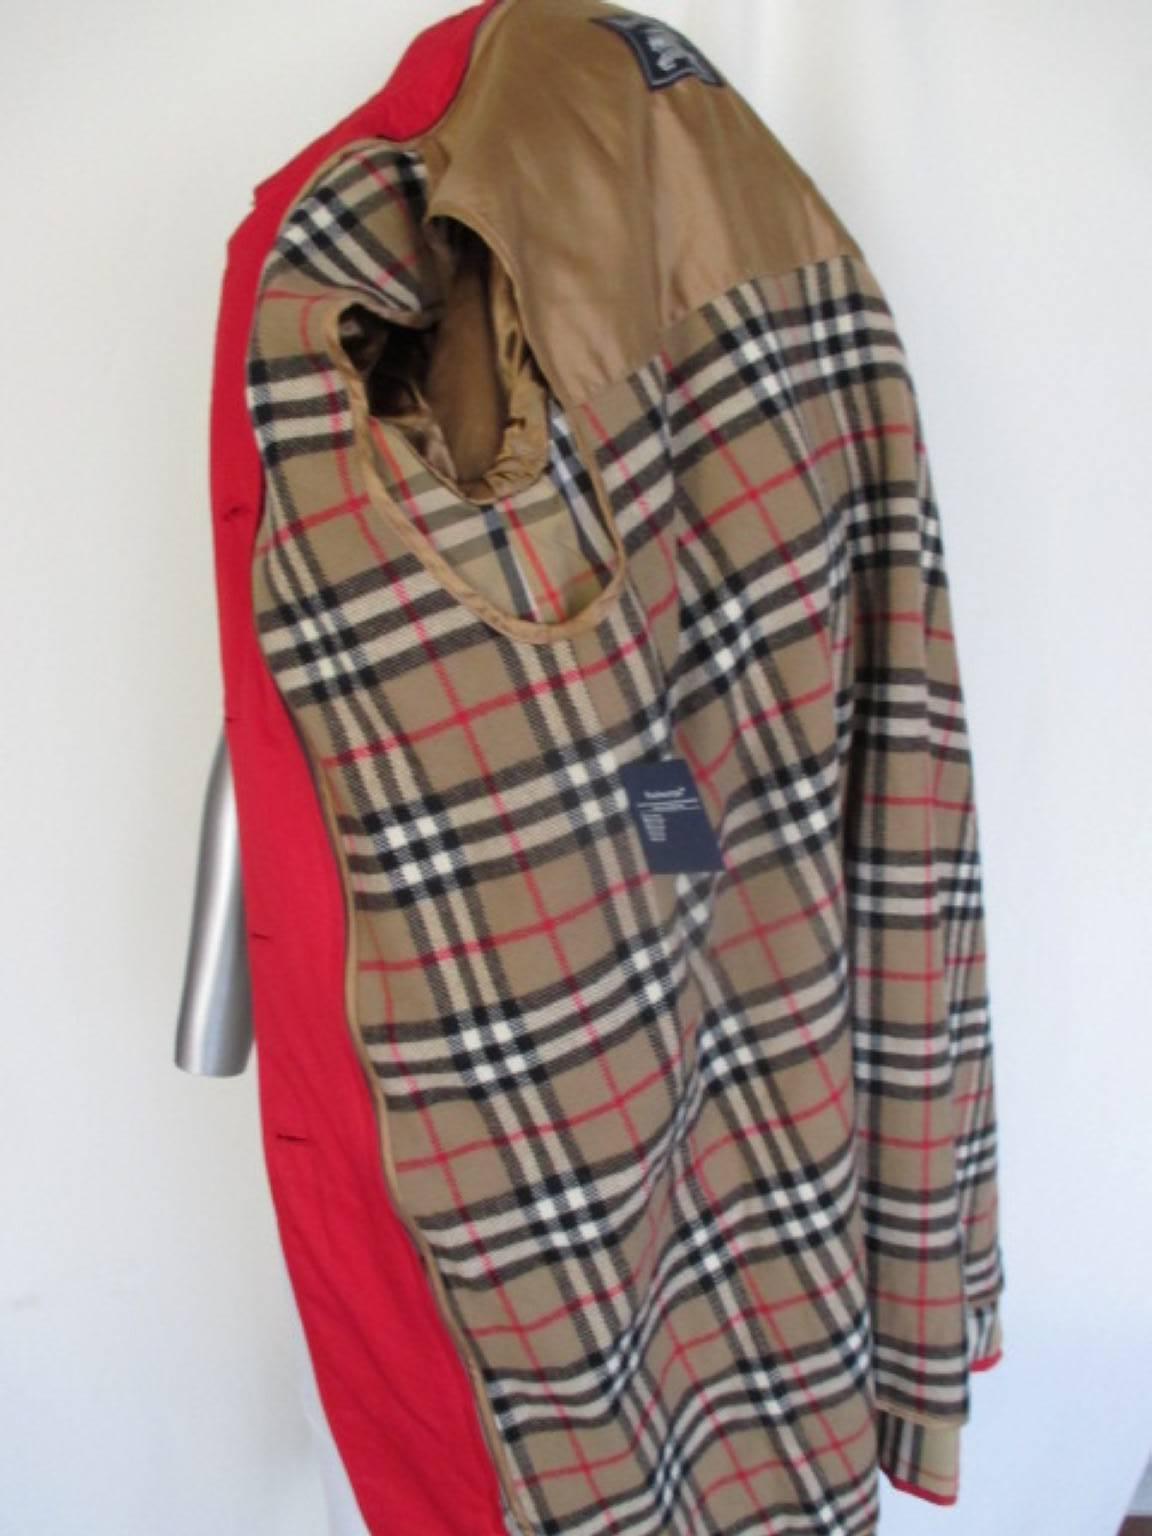 burberry red trench coat